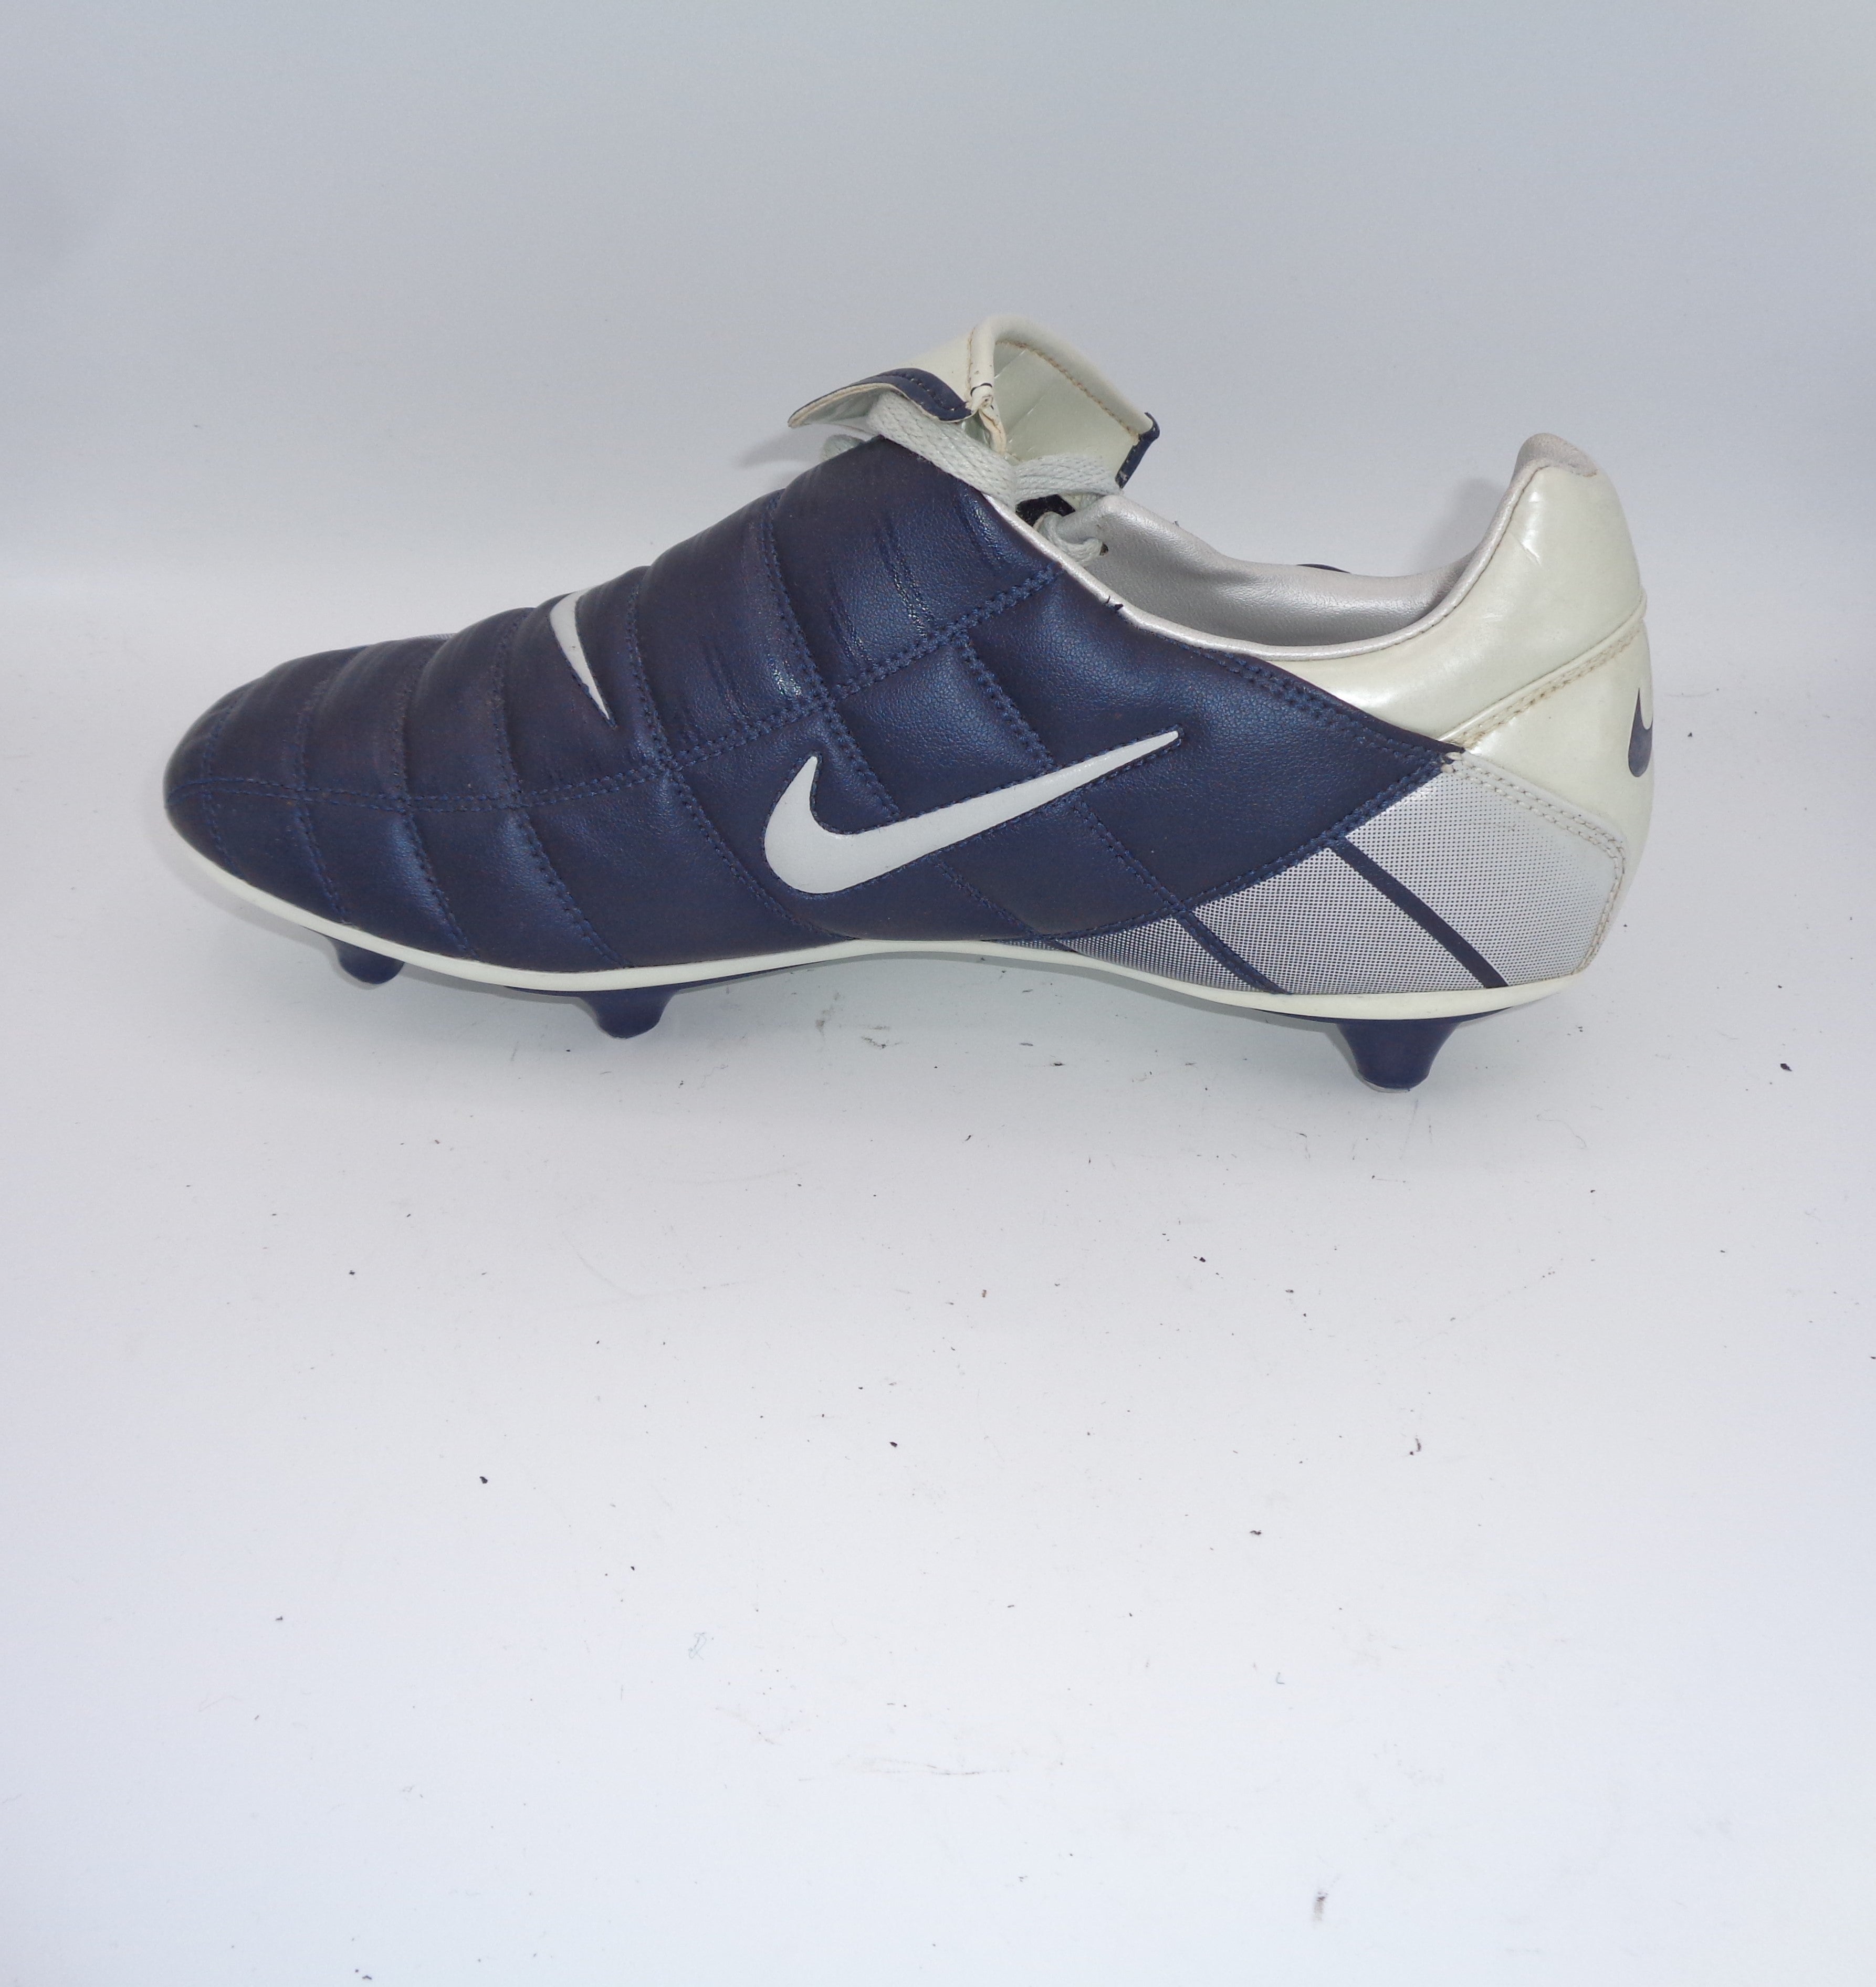 NIKE T90 2004 GREY NAVY FOOTBALL BOOTS - NIKE - T90 - SIZE 5